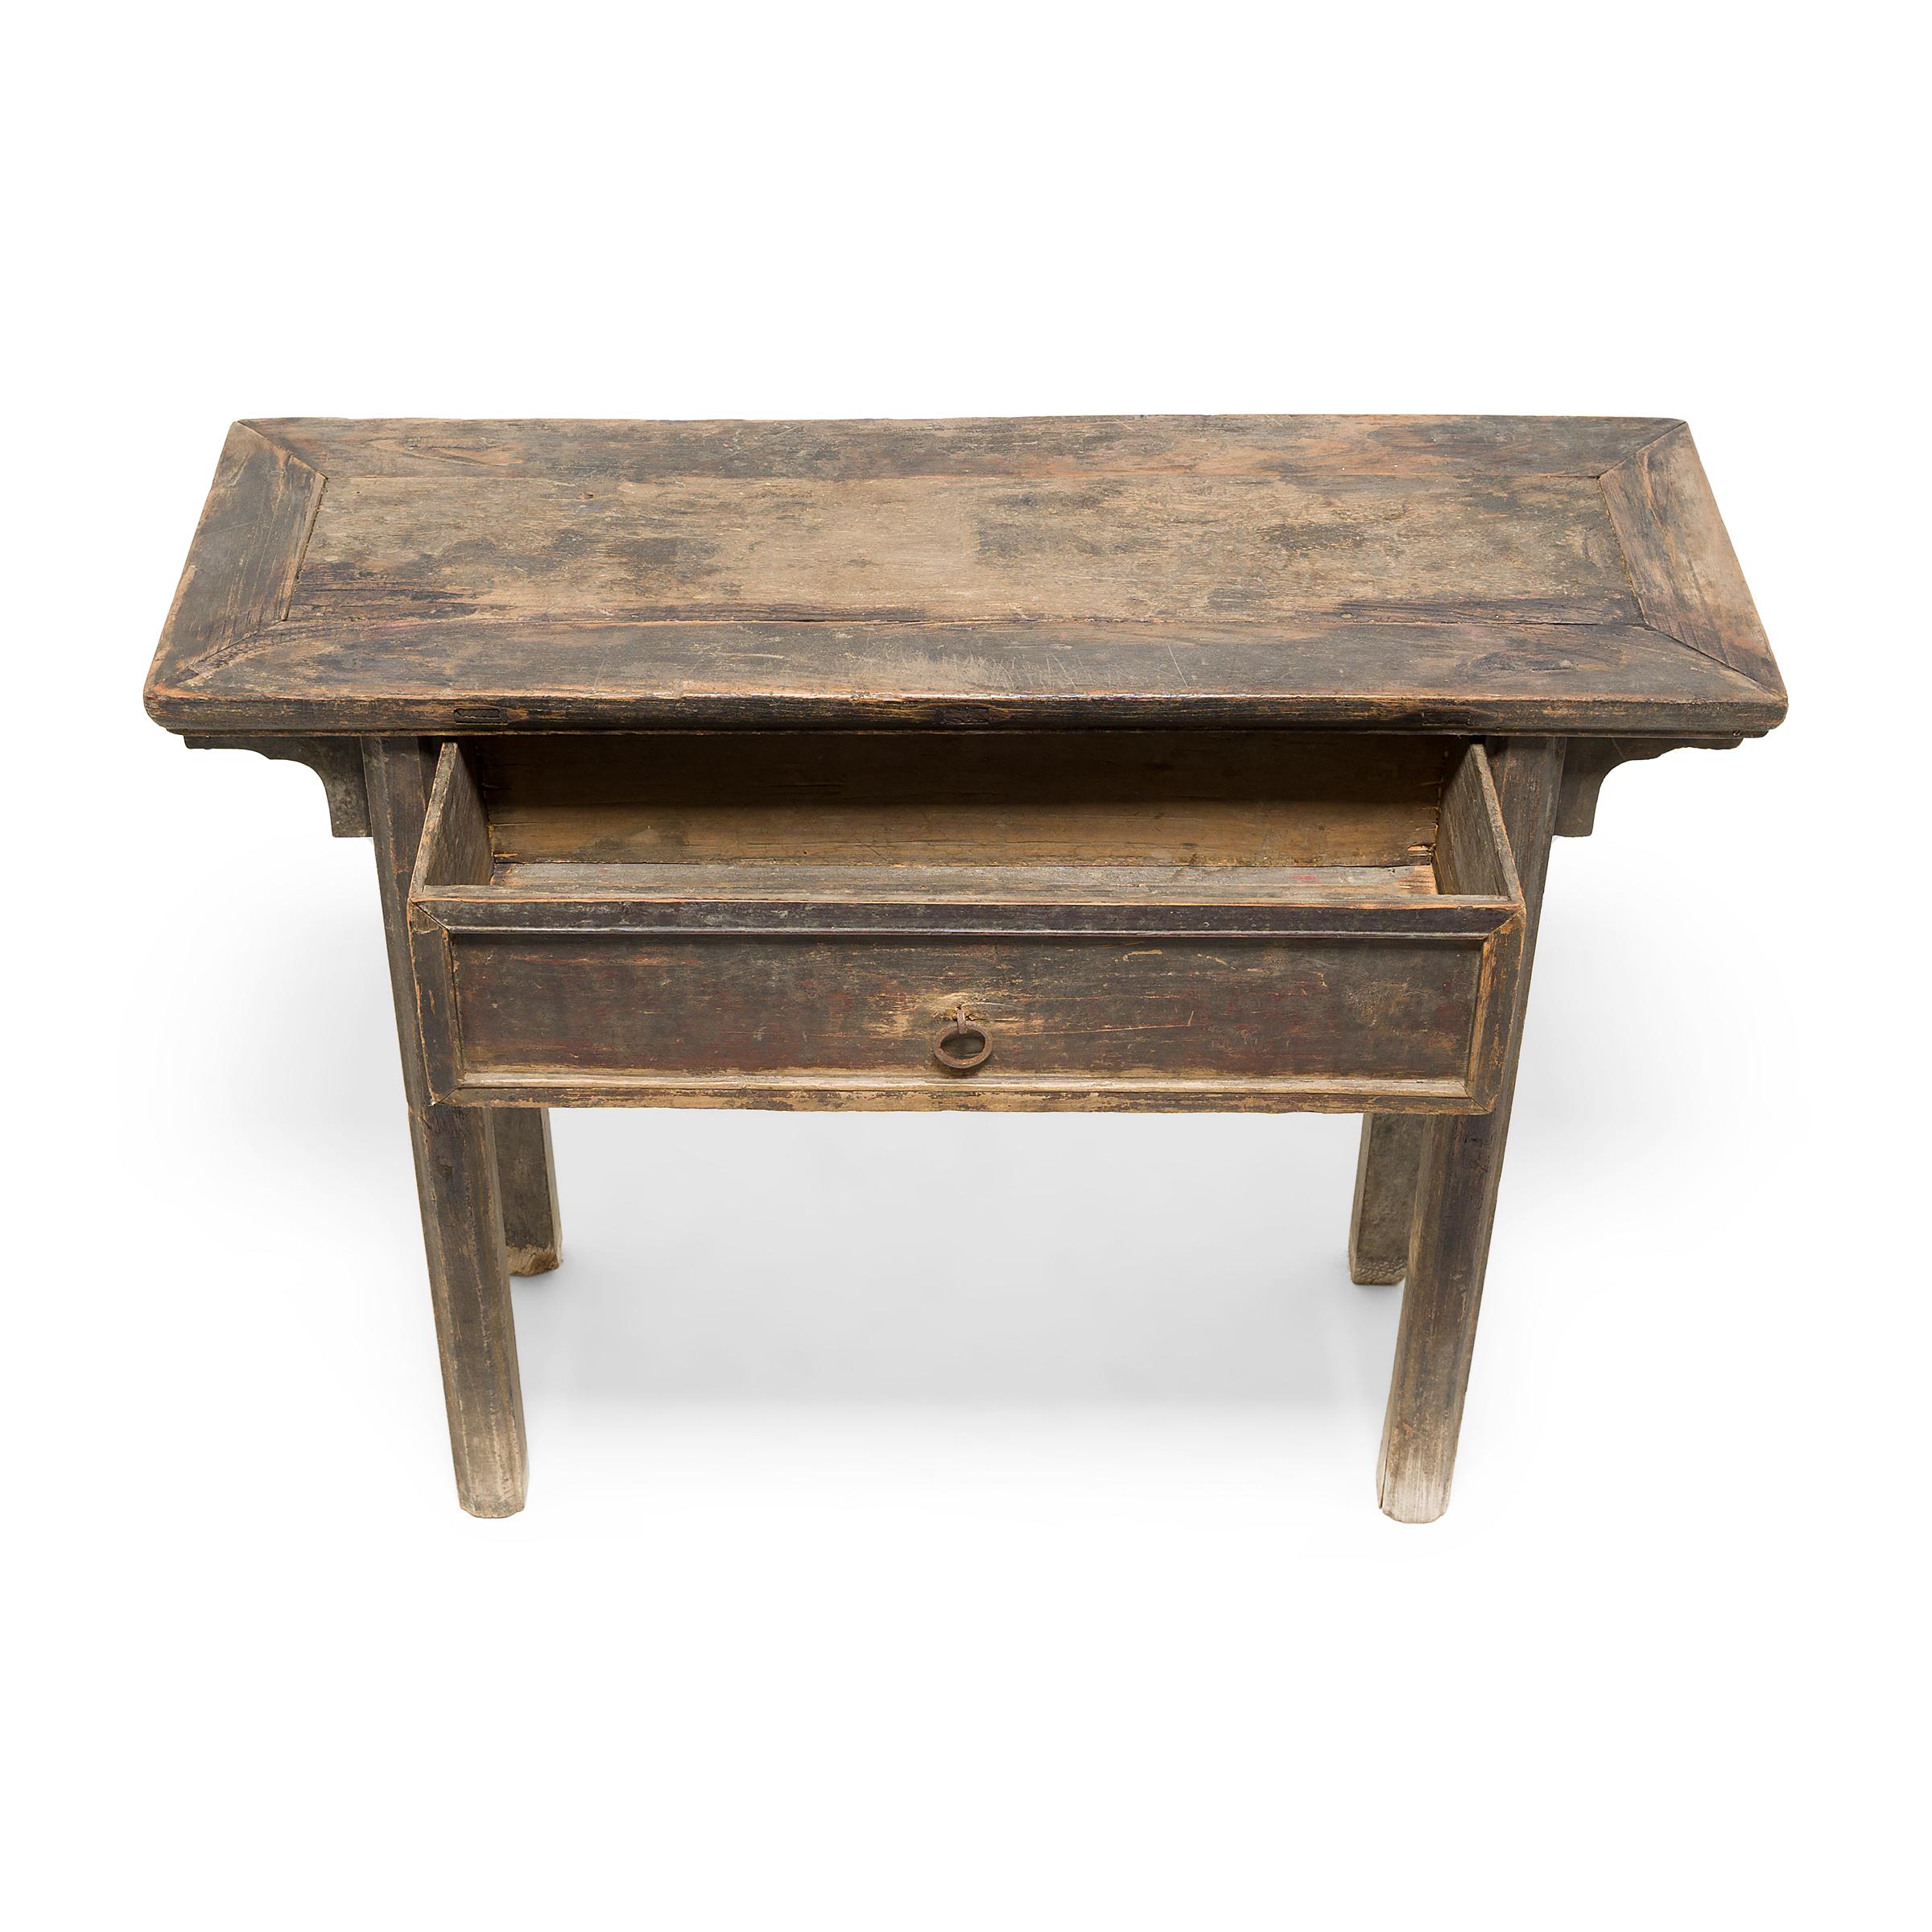 Chinois Table d'offrande chinoise peu profonde, vers 1800 en vente